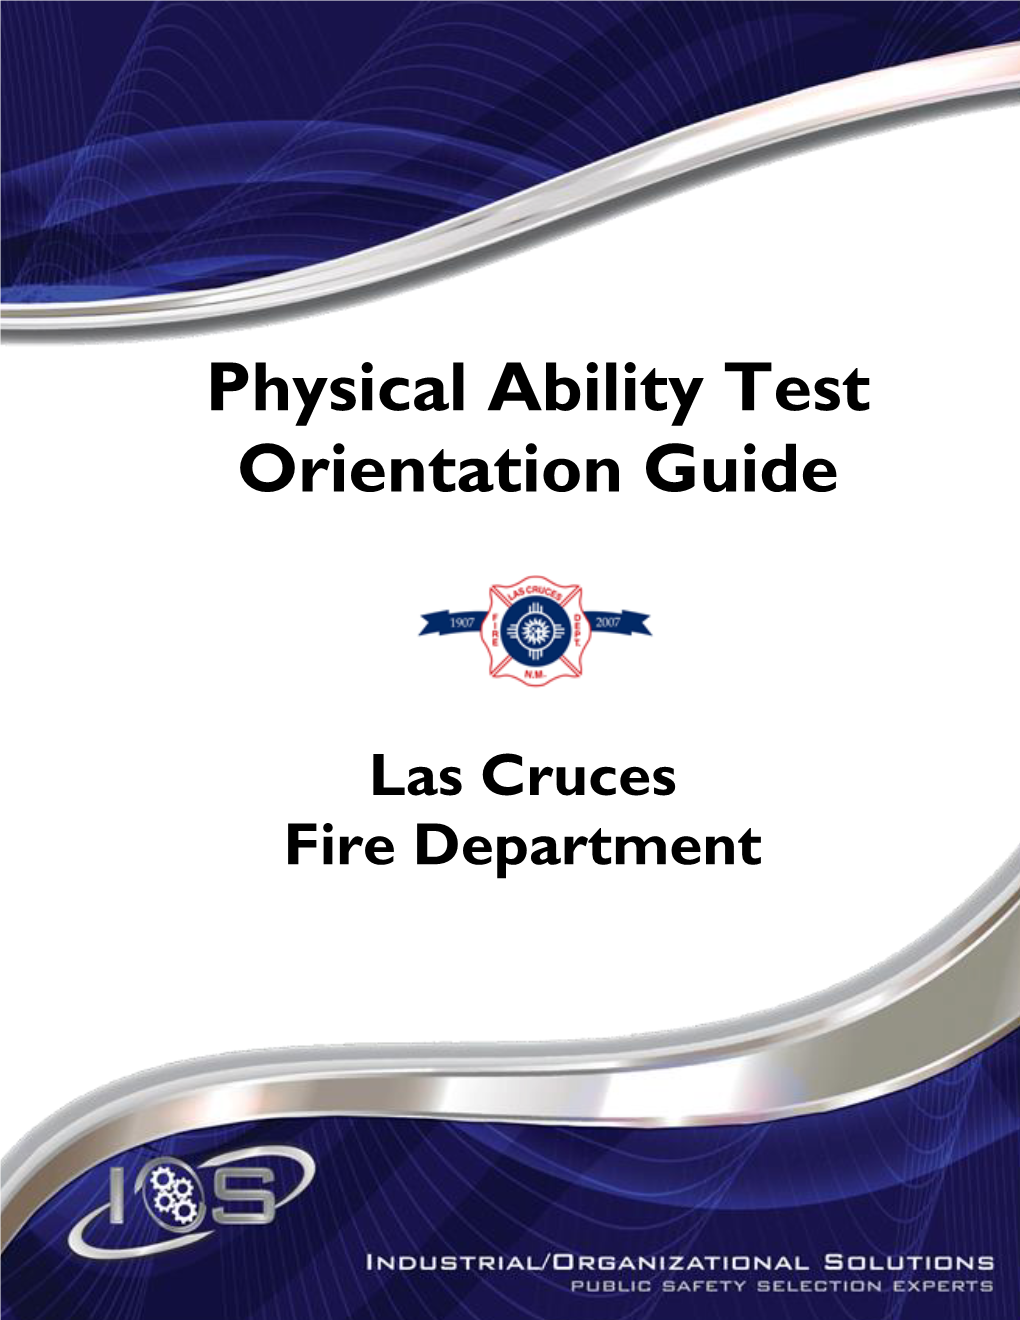 Physical Ability Test Orientation Guide